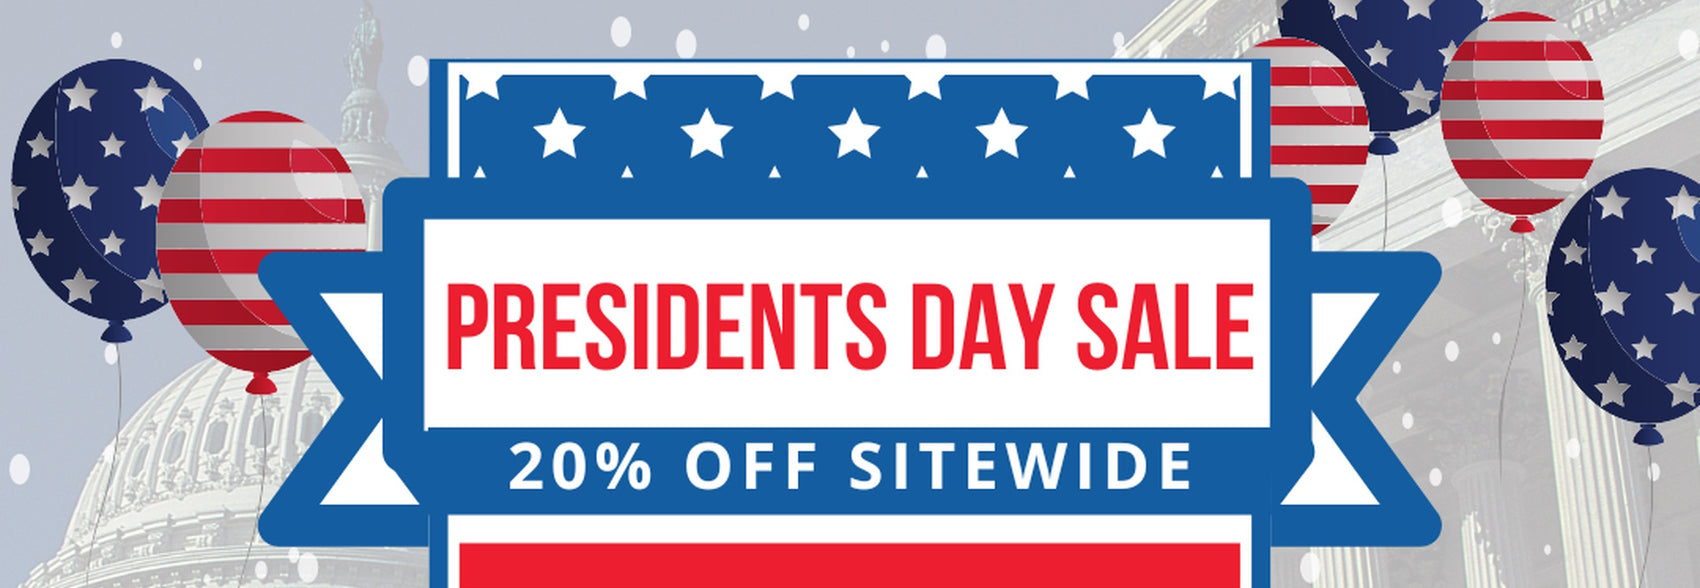 20% OFF SITEWIDE Presidents Day Sale at Northern Lites Snowshoes